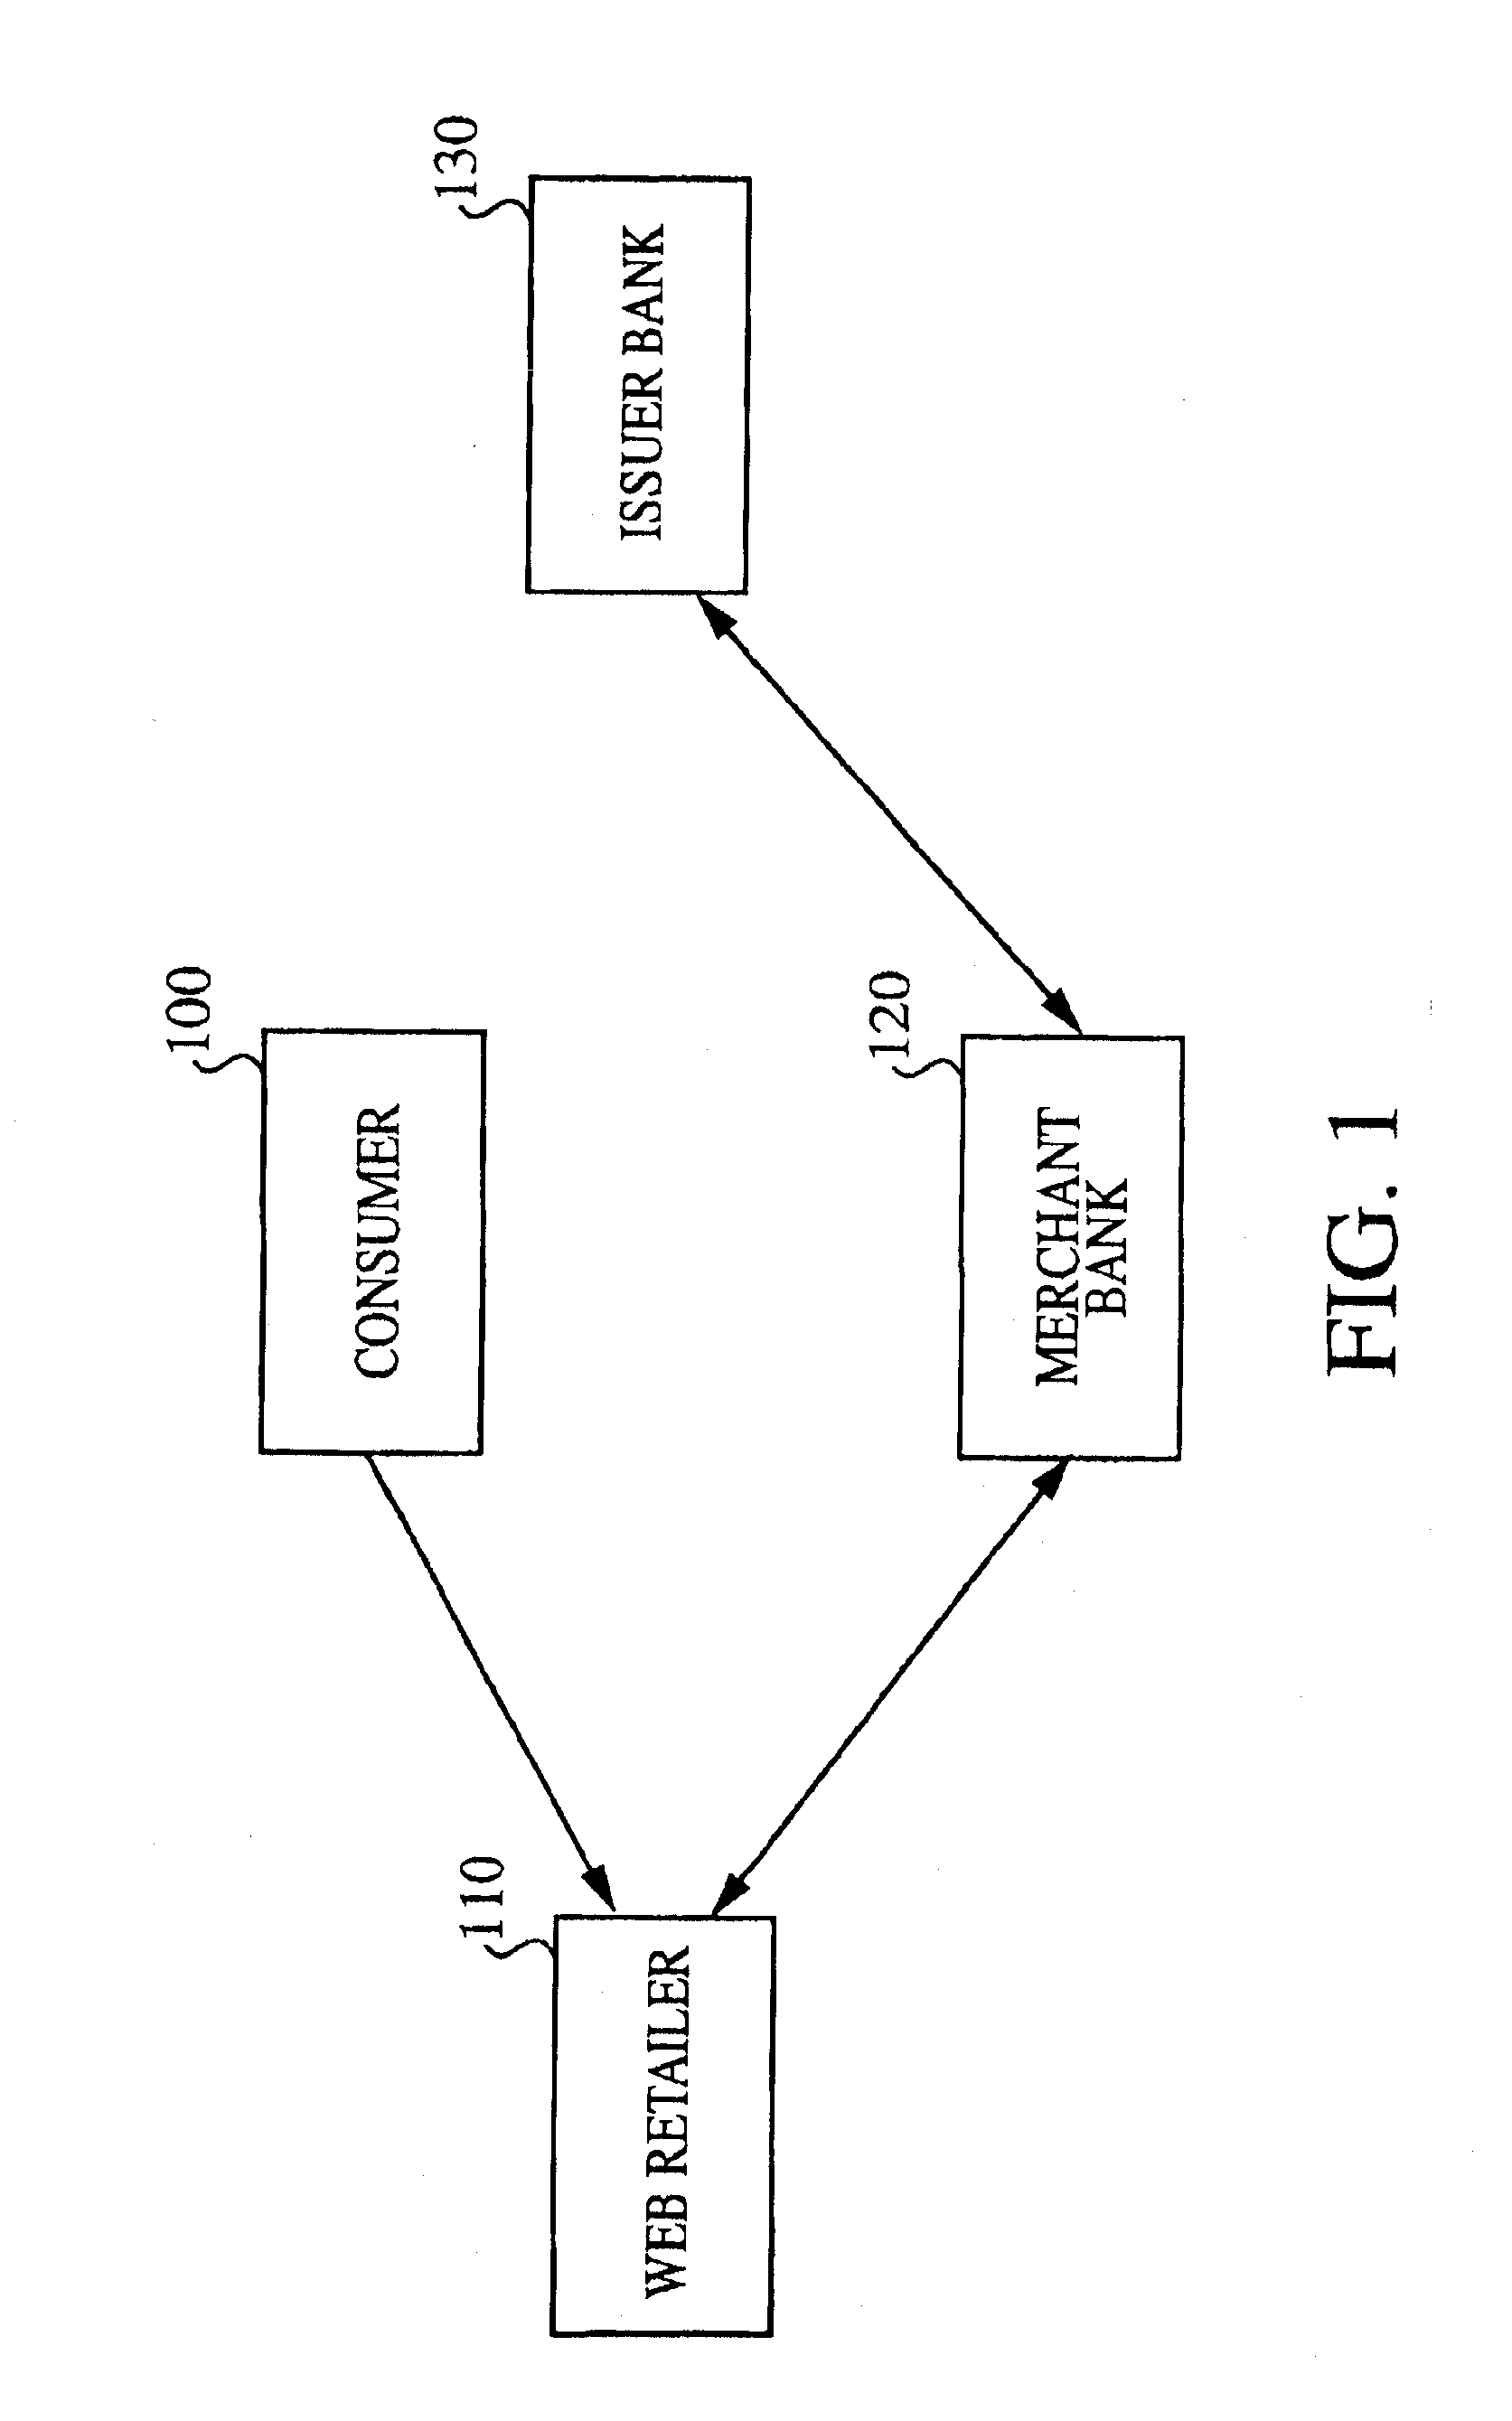 Method and system for processing internet payments using the electronic funds transfer network